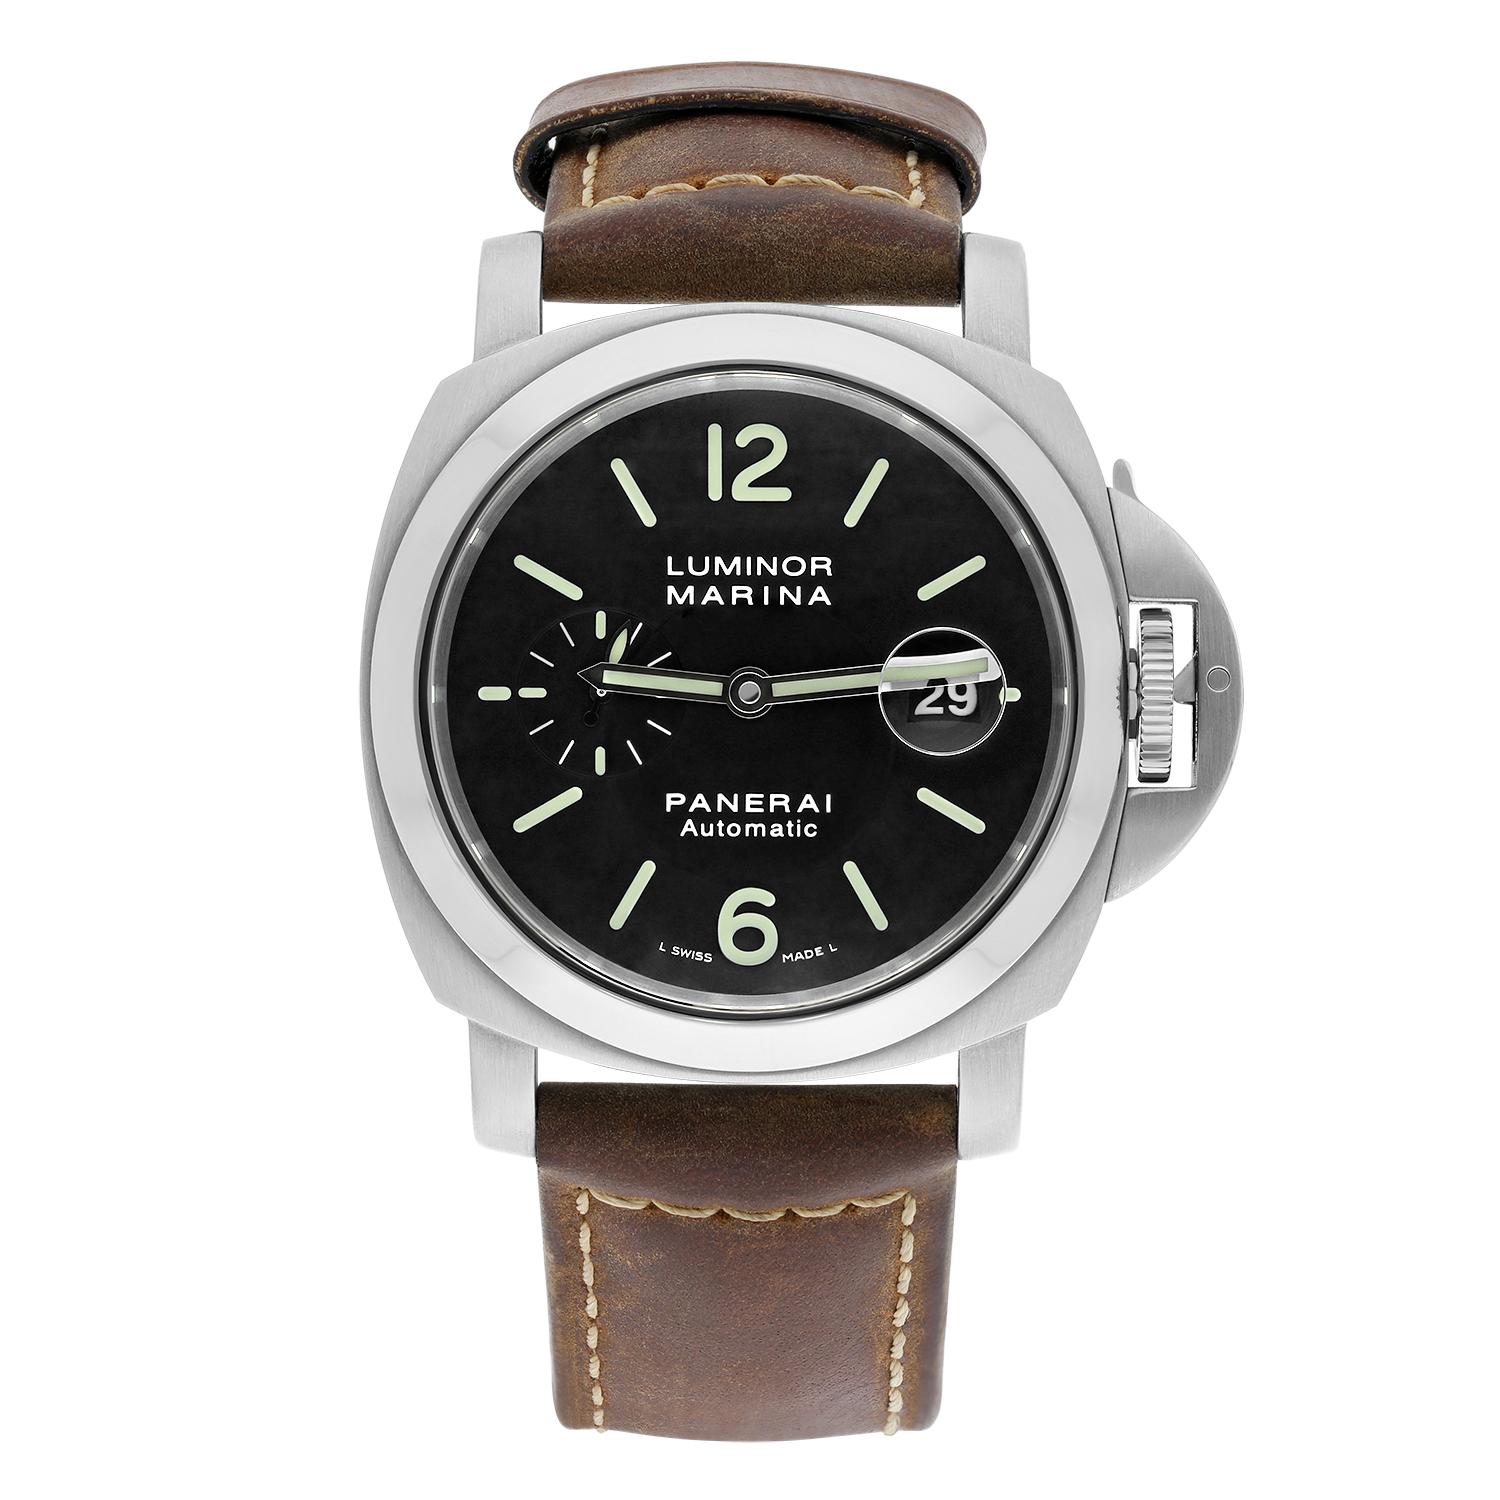 Panerai Luminor Marina PAM00104 Small Second Date Automatic Men's Watch

This watch has been professionally polished, serviced and does not have any visible scratches or blemishes. It is a genuine Panerai which has been inspected to verify